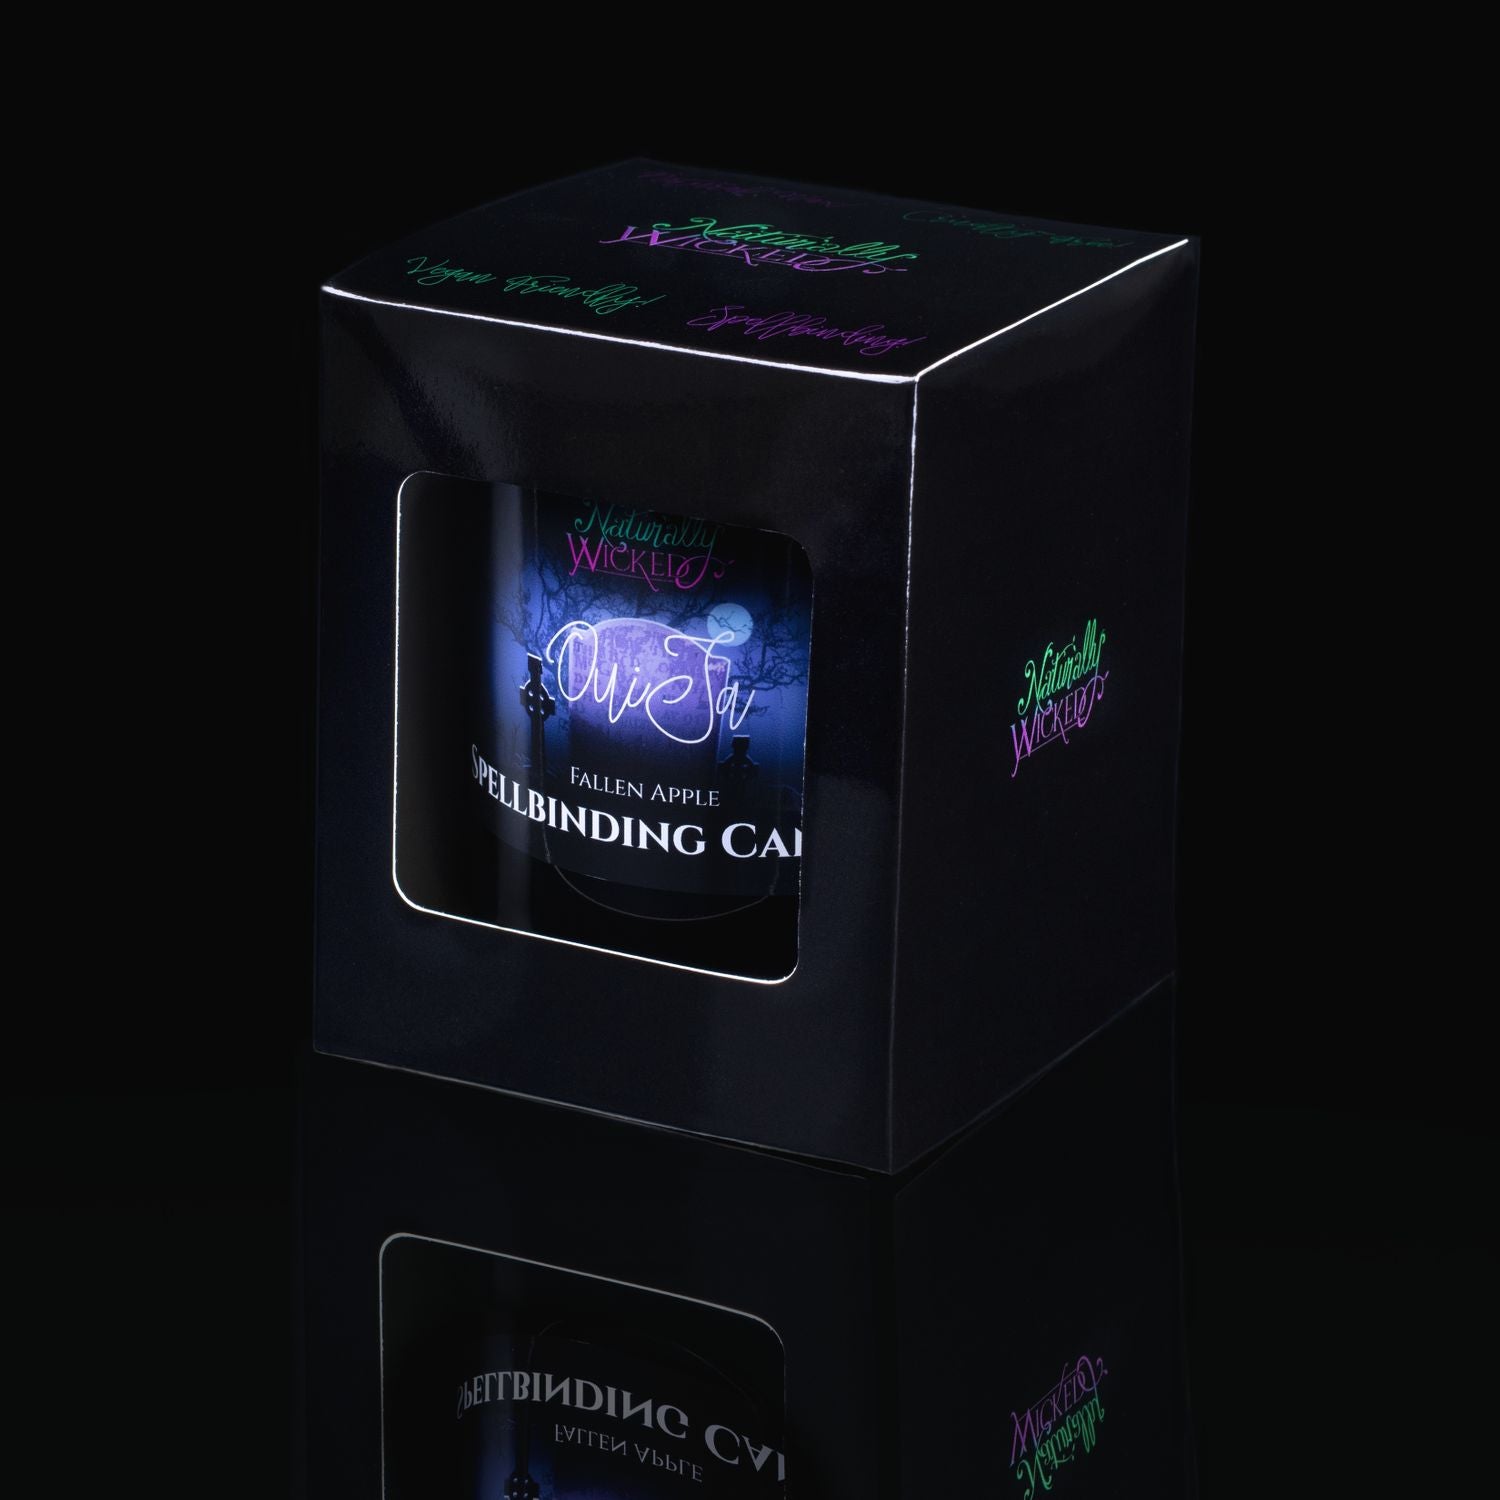 The Perfect Spell Candle For The Brave. Naturally Wicked Spellbinding Ouija Candle Displayed In A Sleek Black Gloss Gift Box. The Candle Features Plant-Based Smooth Blue Wax, A Wood Wick And A Beautiful Carved Sodalite Crystal. Panchette